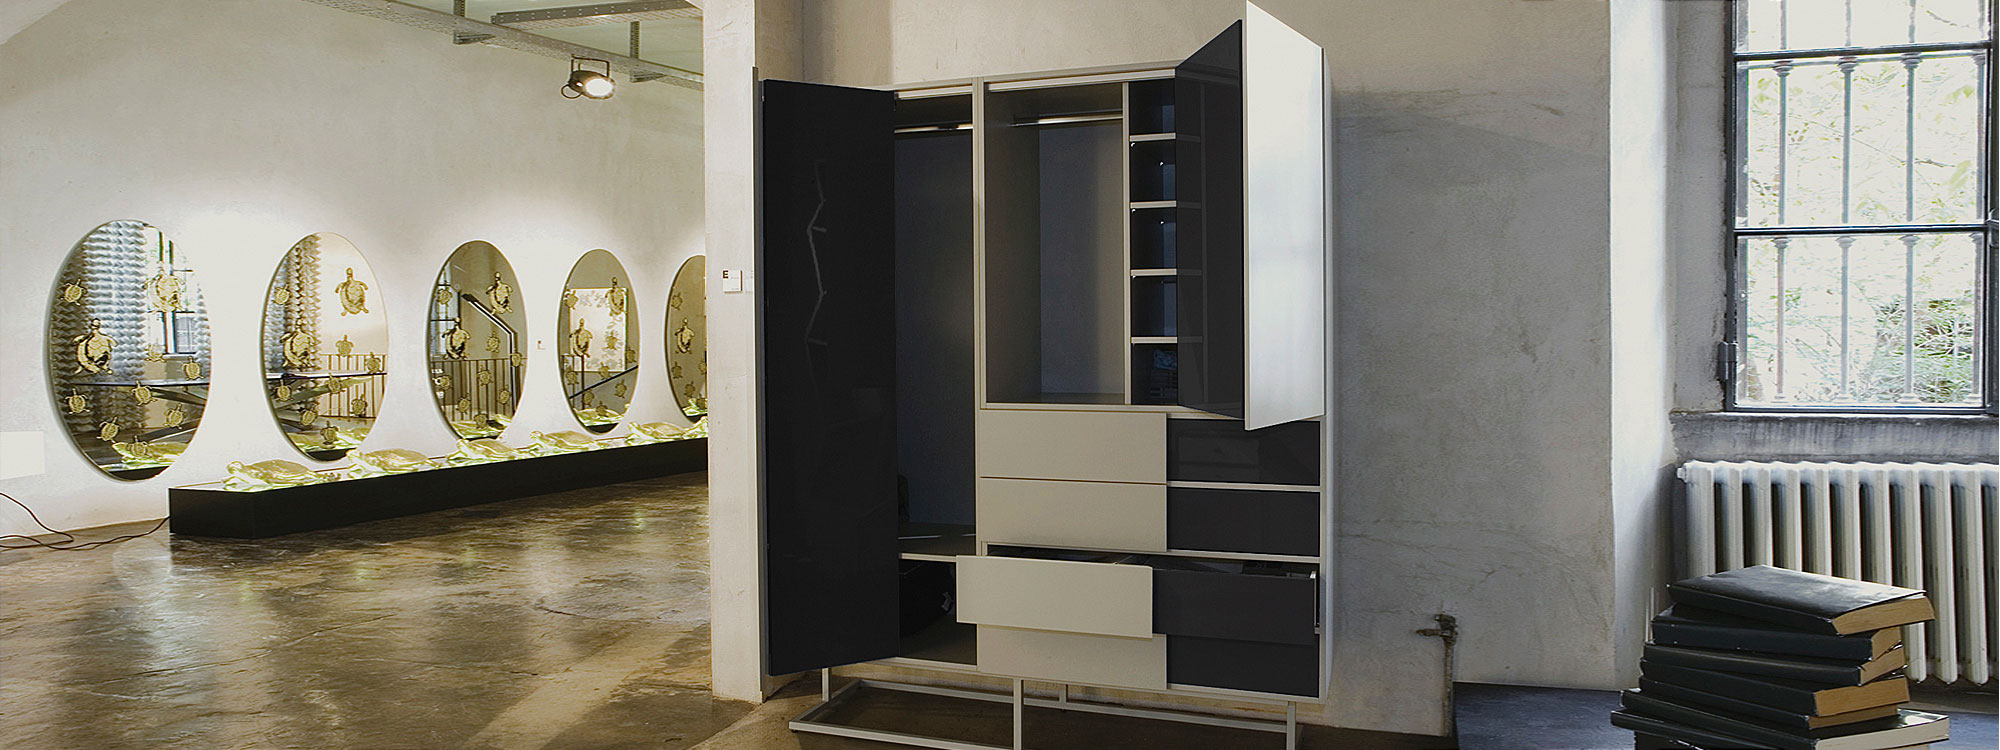 Quodes Teca Contemporary Wardrobe, Modern Chest of Drawers,Bedside Table, Dressboy. Luxury Design By Alfredo Häberli.